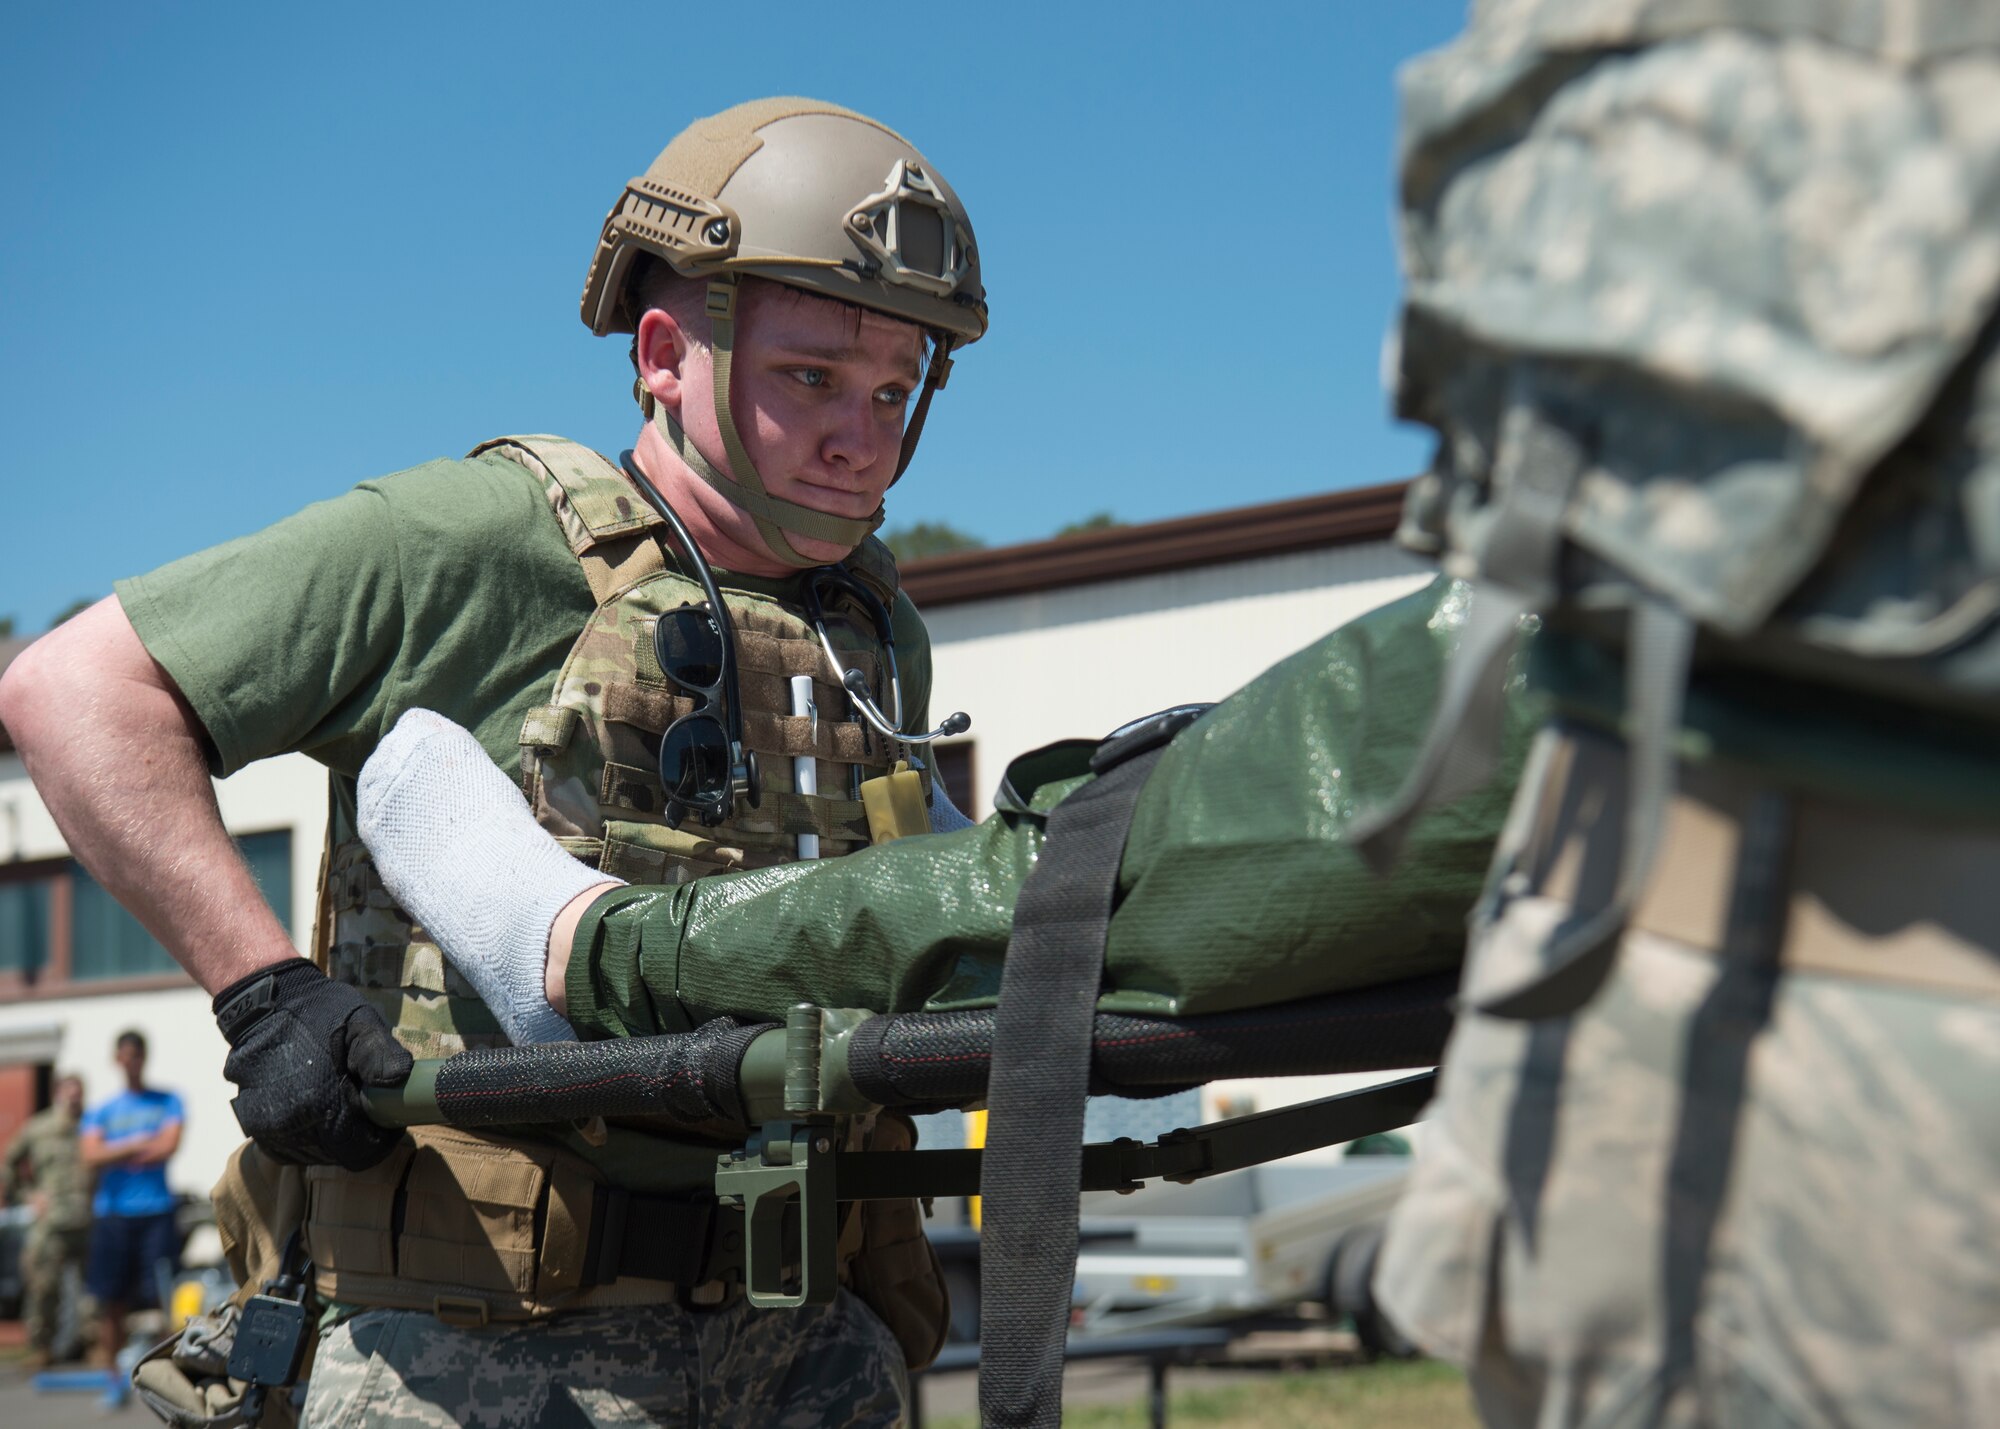 A medic lifts a training victim into a Humvee at Ramstein Air Base, Germany, July 23, 2019. Participants of the U.S. Air Forces in Europe EMT Rodeo had to use not only their skills but their physical and mental strength for these challenges. (U.S. Air Force photo by Staff Sgt. Kirby Turbak)